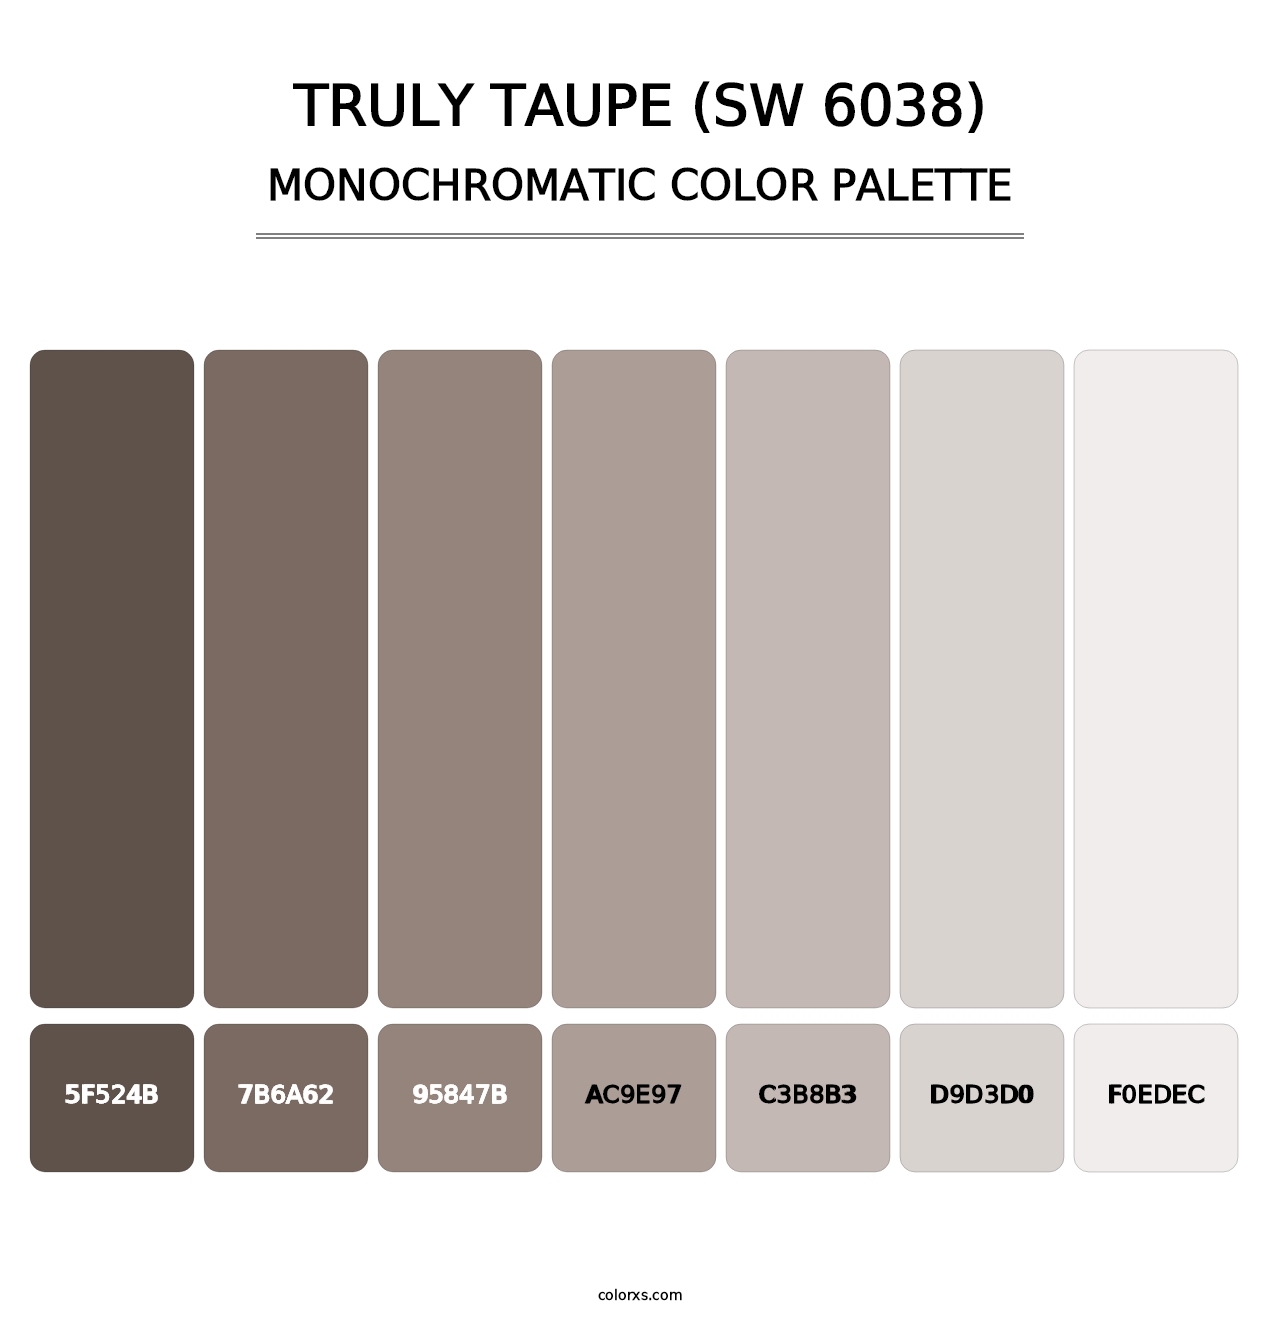 Truly Taupe (SW 6038) - Monochromatic Color Palette